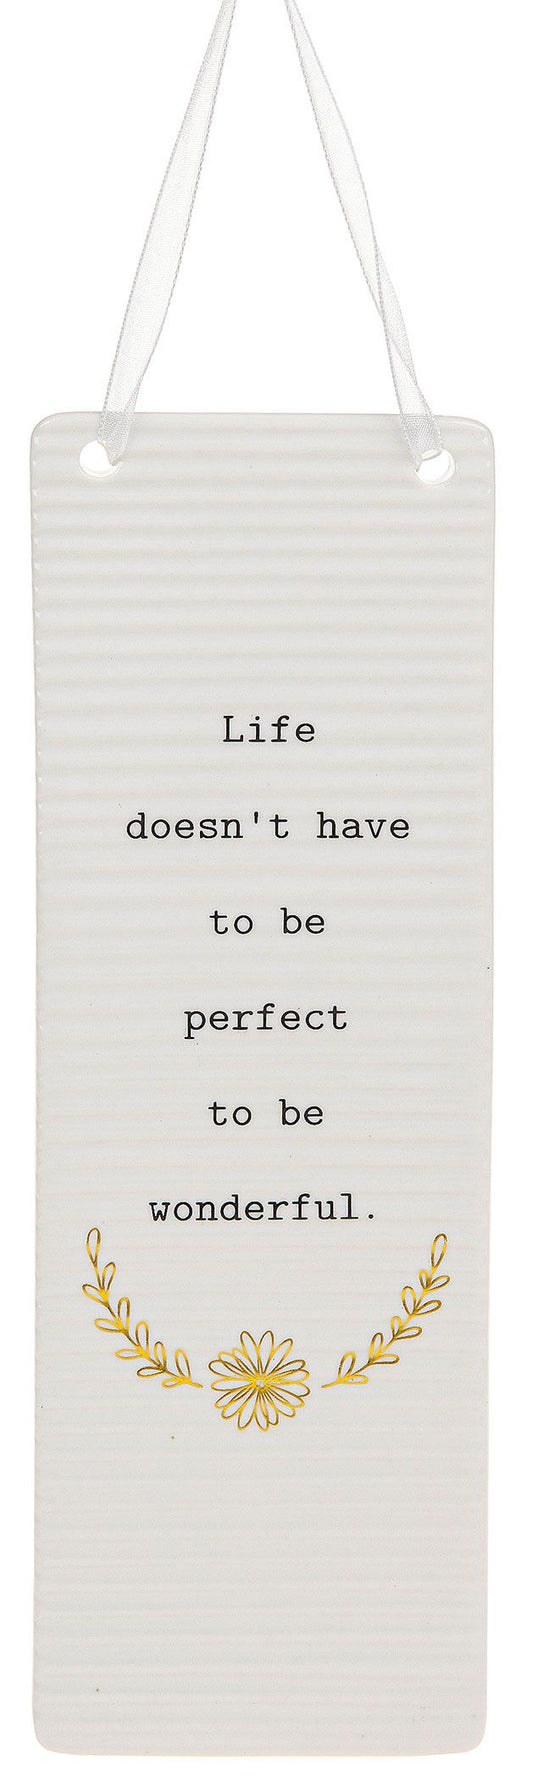 Life doesn't have to be perfect to be wonderful. Rectangle hanging plaque